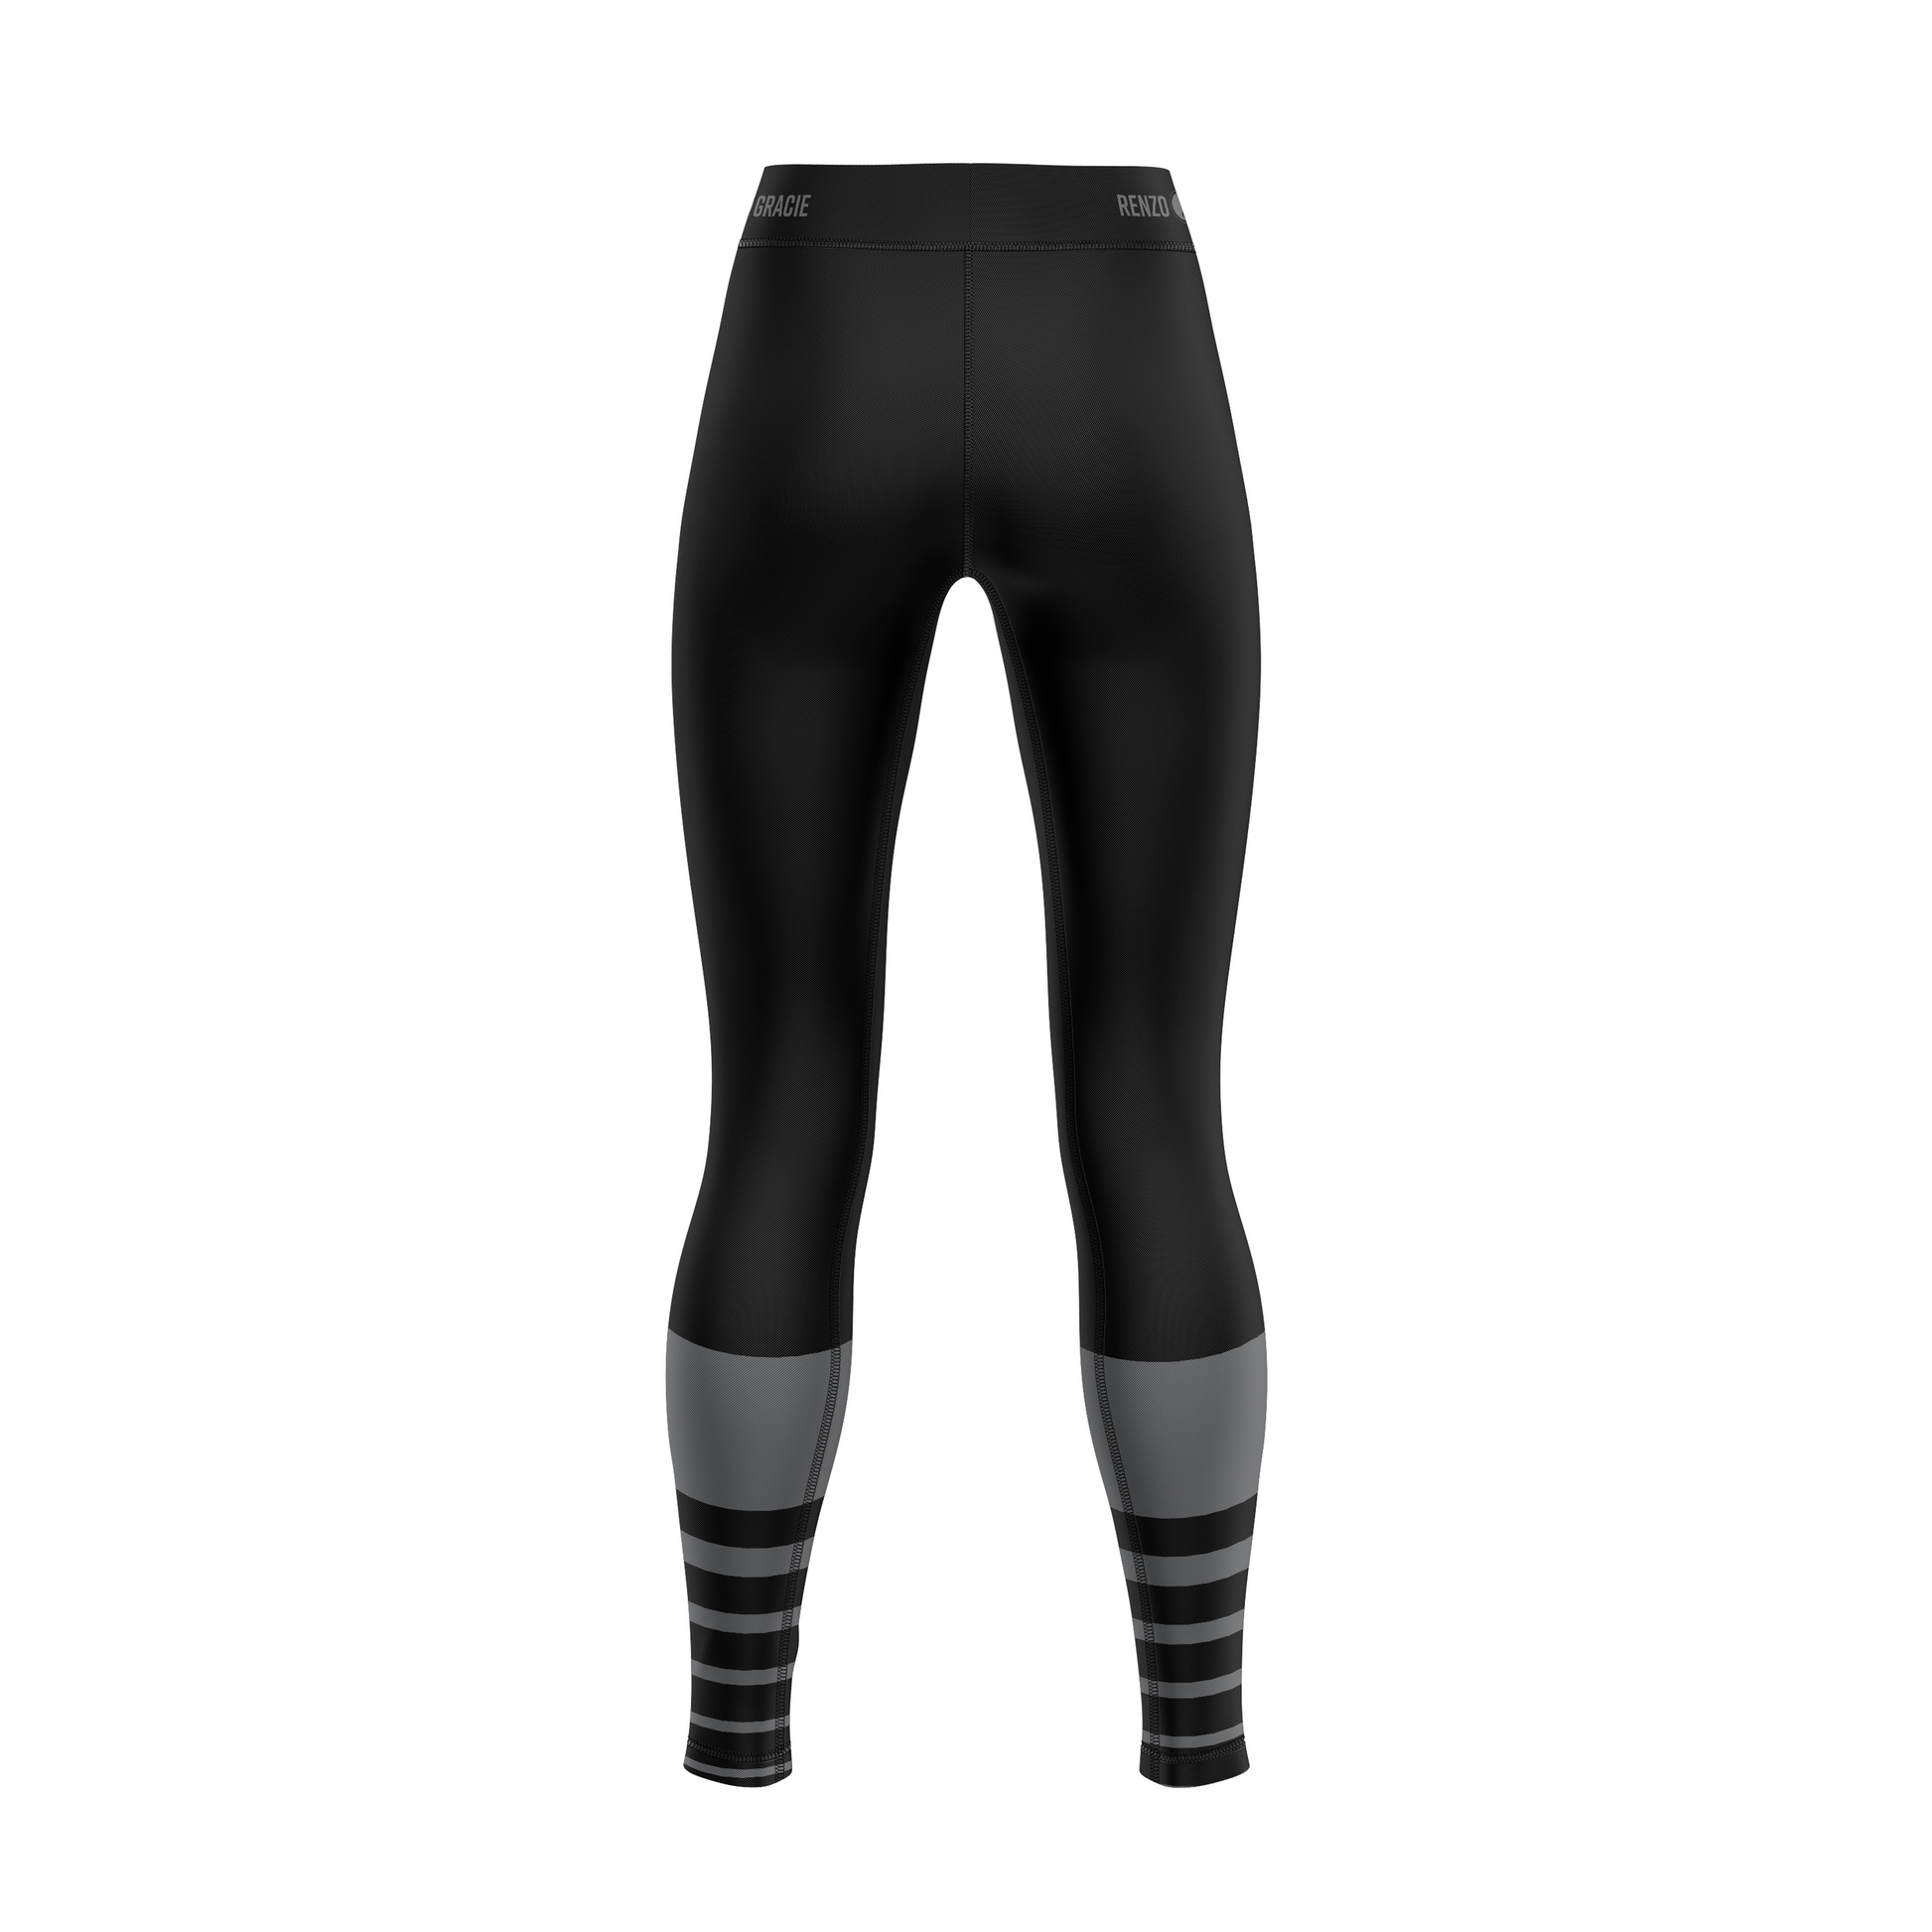 Renzo Gracie Katy women's grappling tights Standard Issue, black and grey